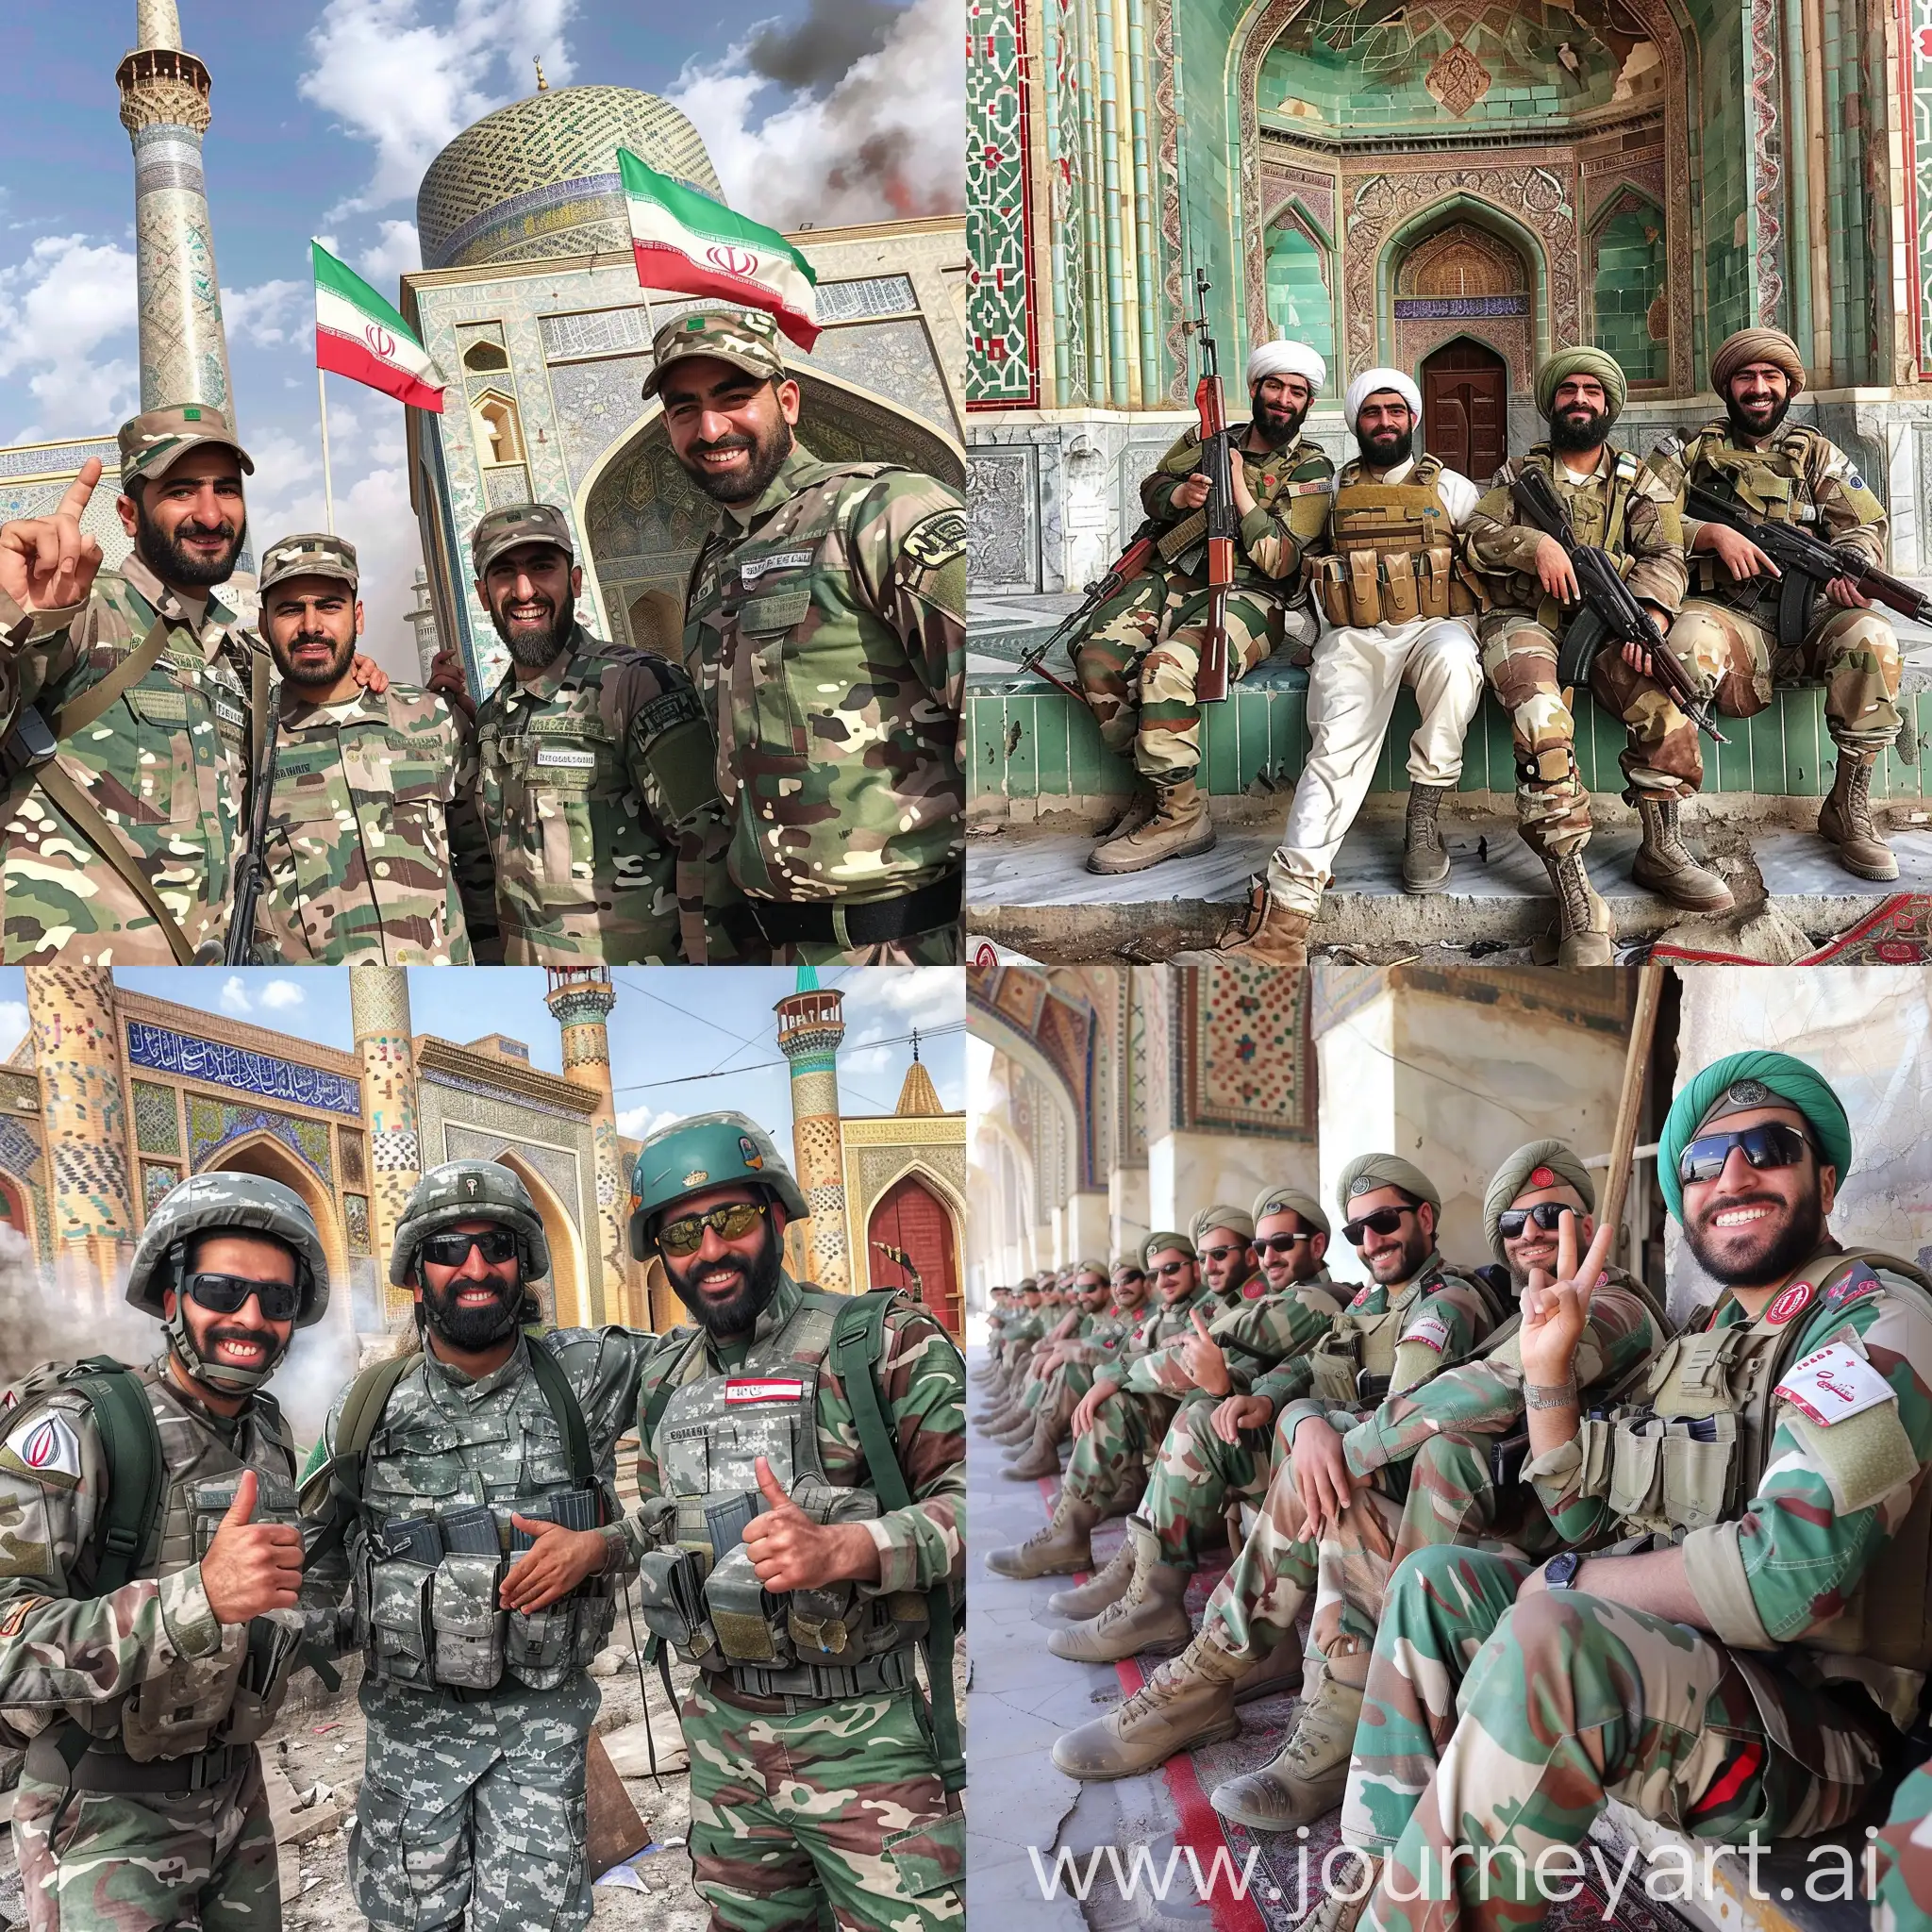 Iranian-Soldiers-Celebrating-at-Khorramshahr-Mosque-Epic-Atmosphere-in-Green-White-and-Red